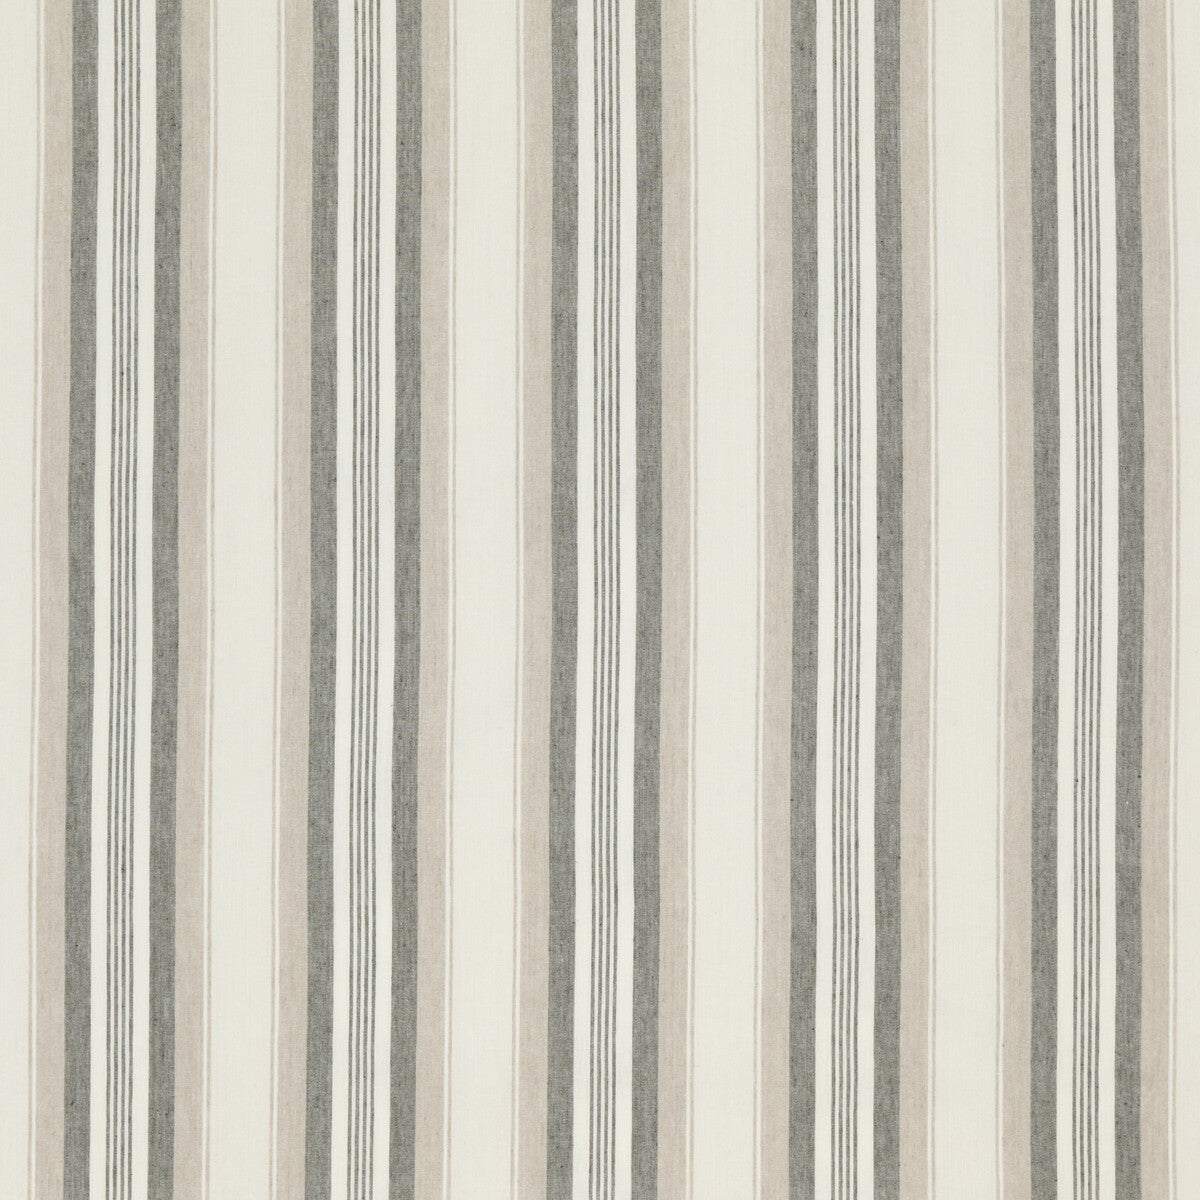 Lovisa fabric in taupe color - pattern ED85301.210.0 - by Threads in the Great Stripes collection